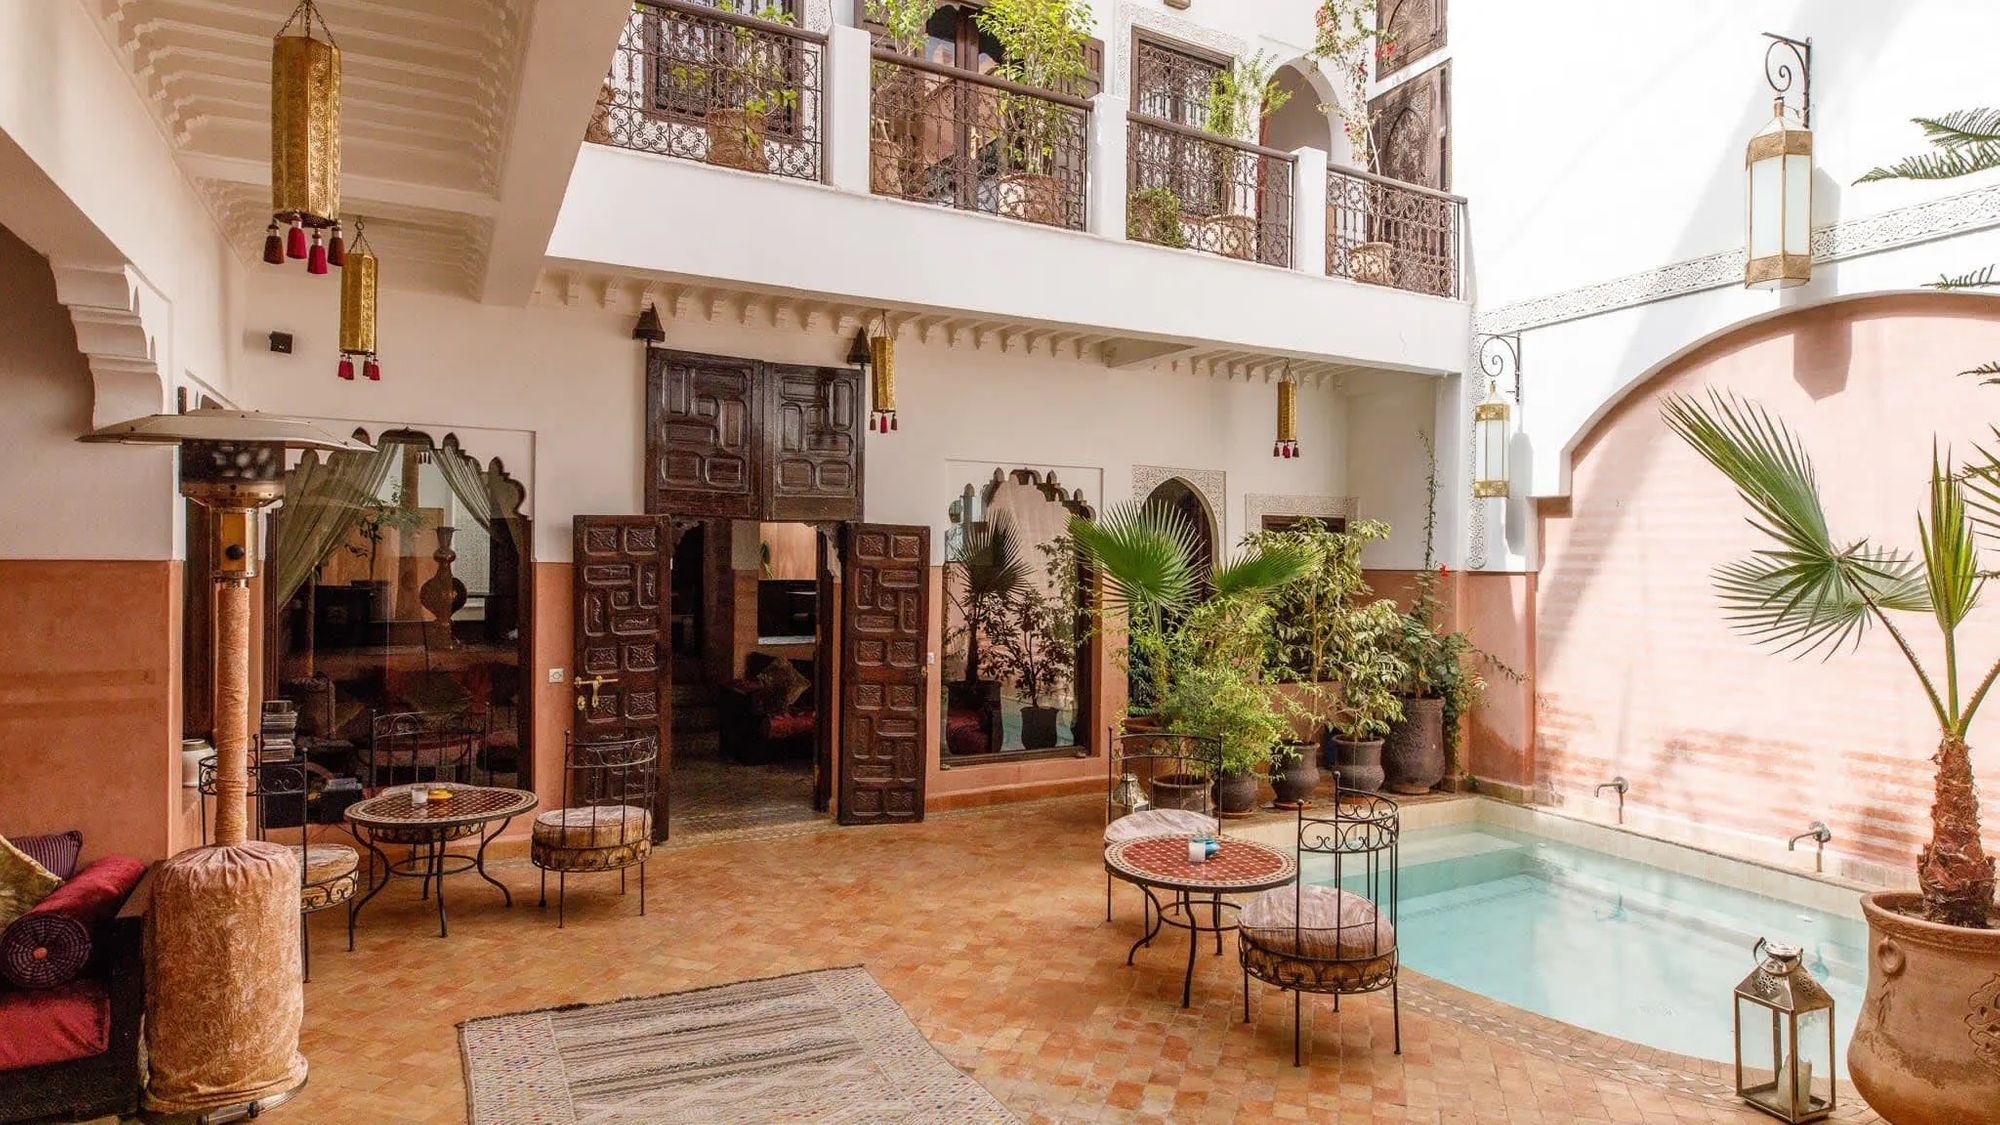 A traditional Moroccan riad in Marrakech